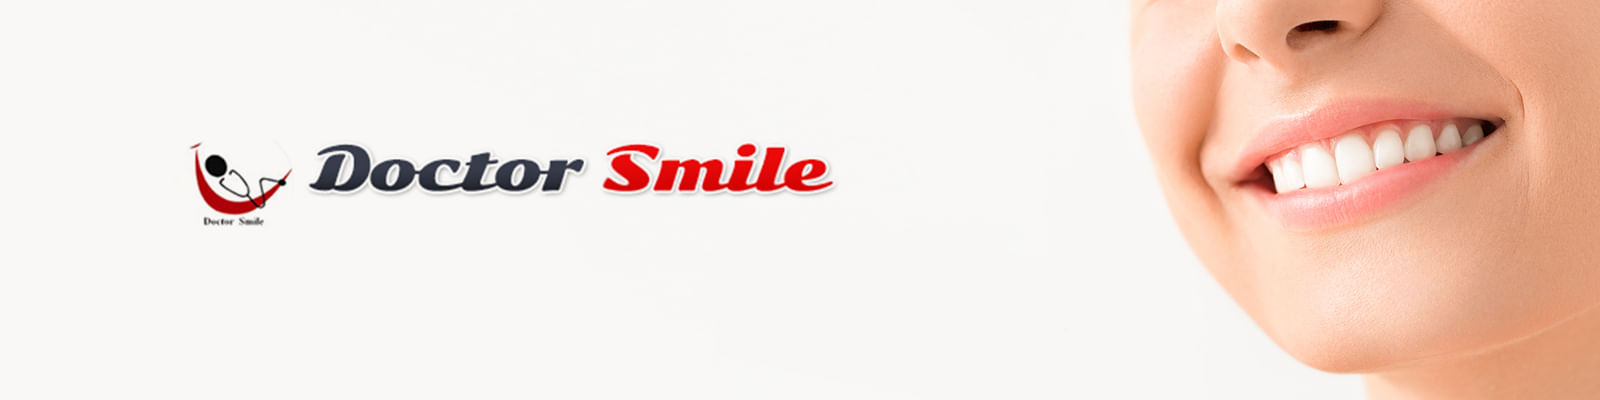 Doctor Smile Multi-speciality Dental Clinic